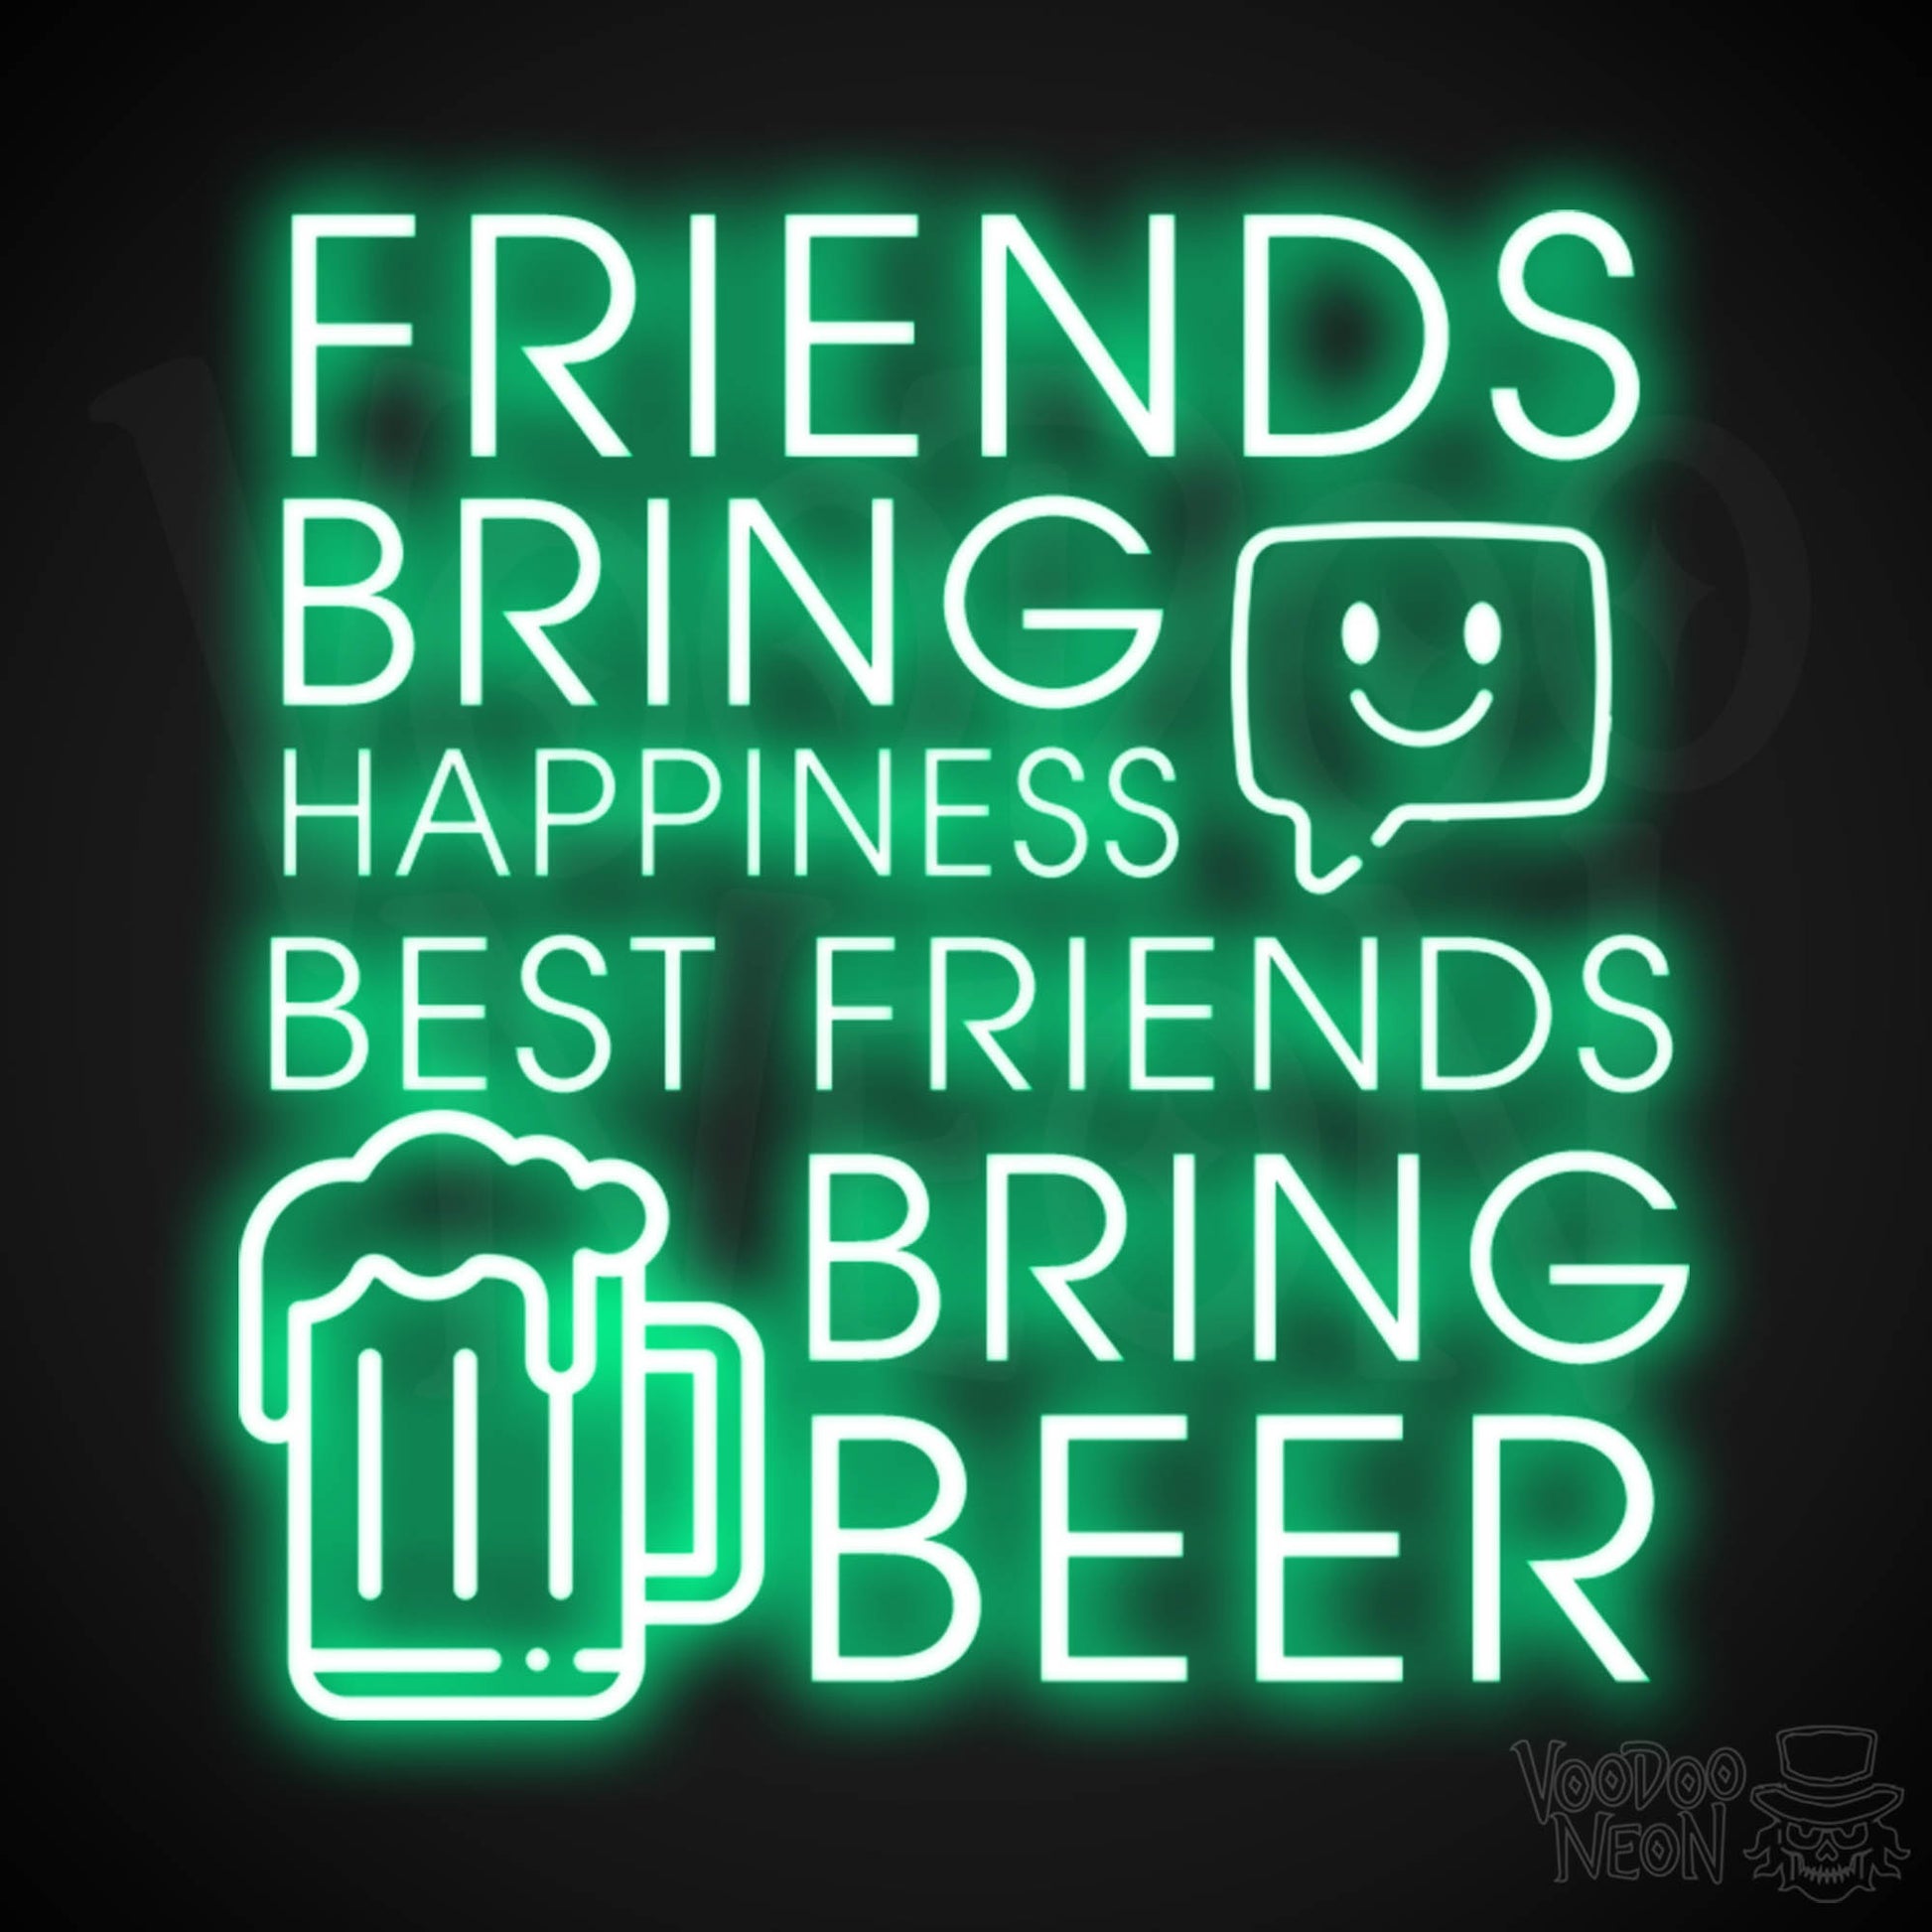 Friends Bring Happiness Best Friends Bring Beer Neon Sign - LED Lights Wall Art - Color Green